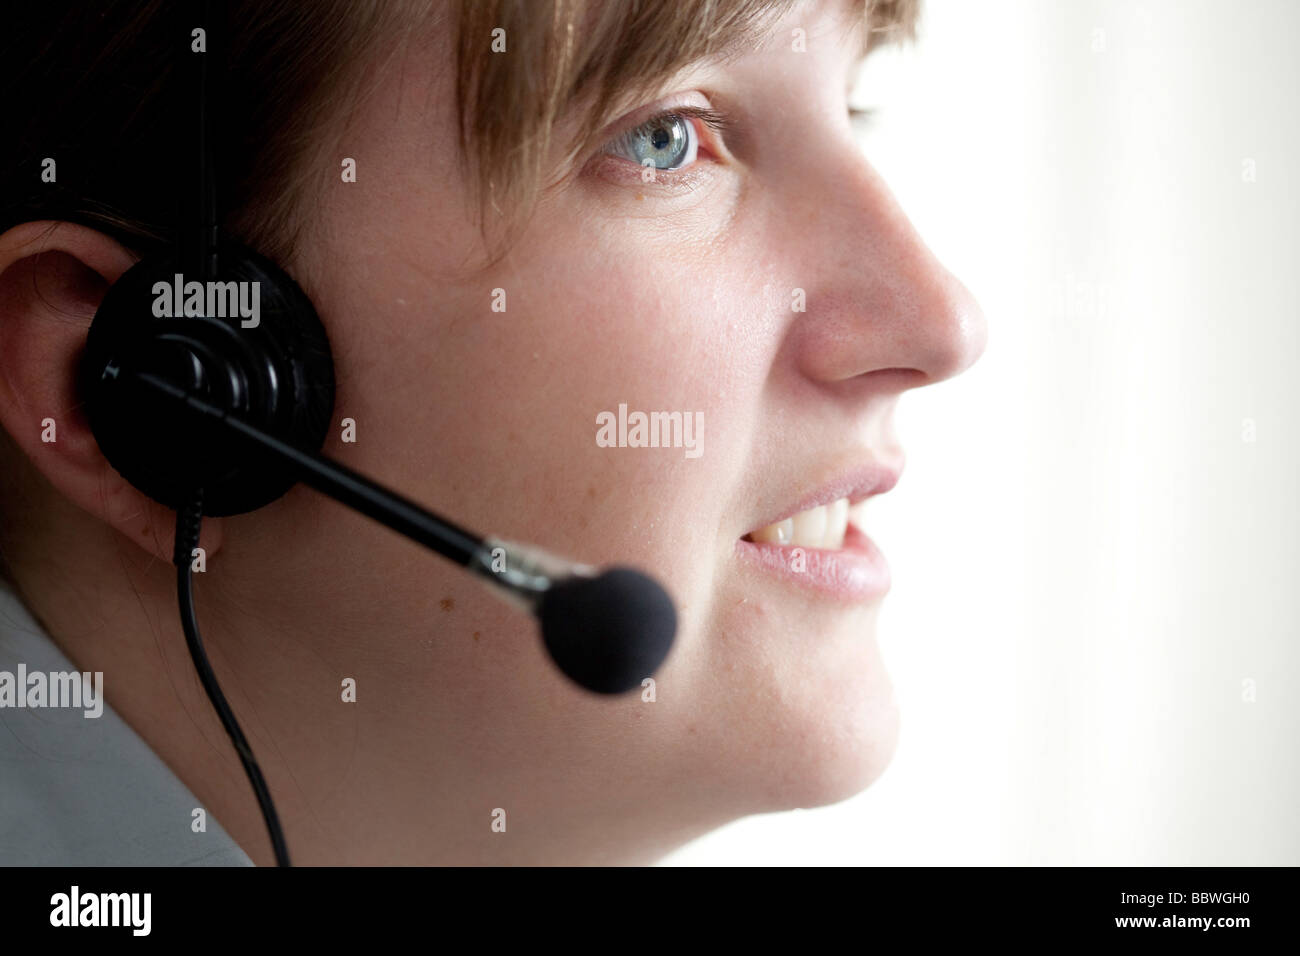 Worker at a call center Stock Photo